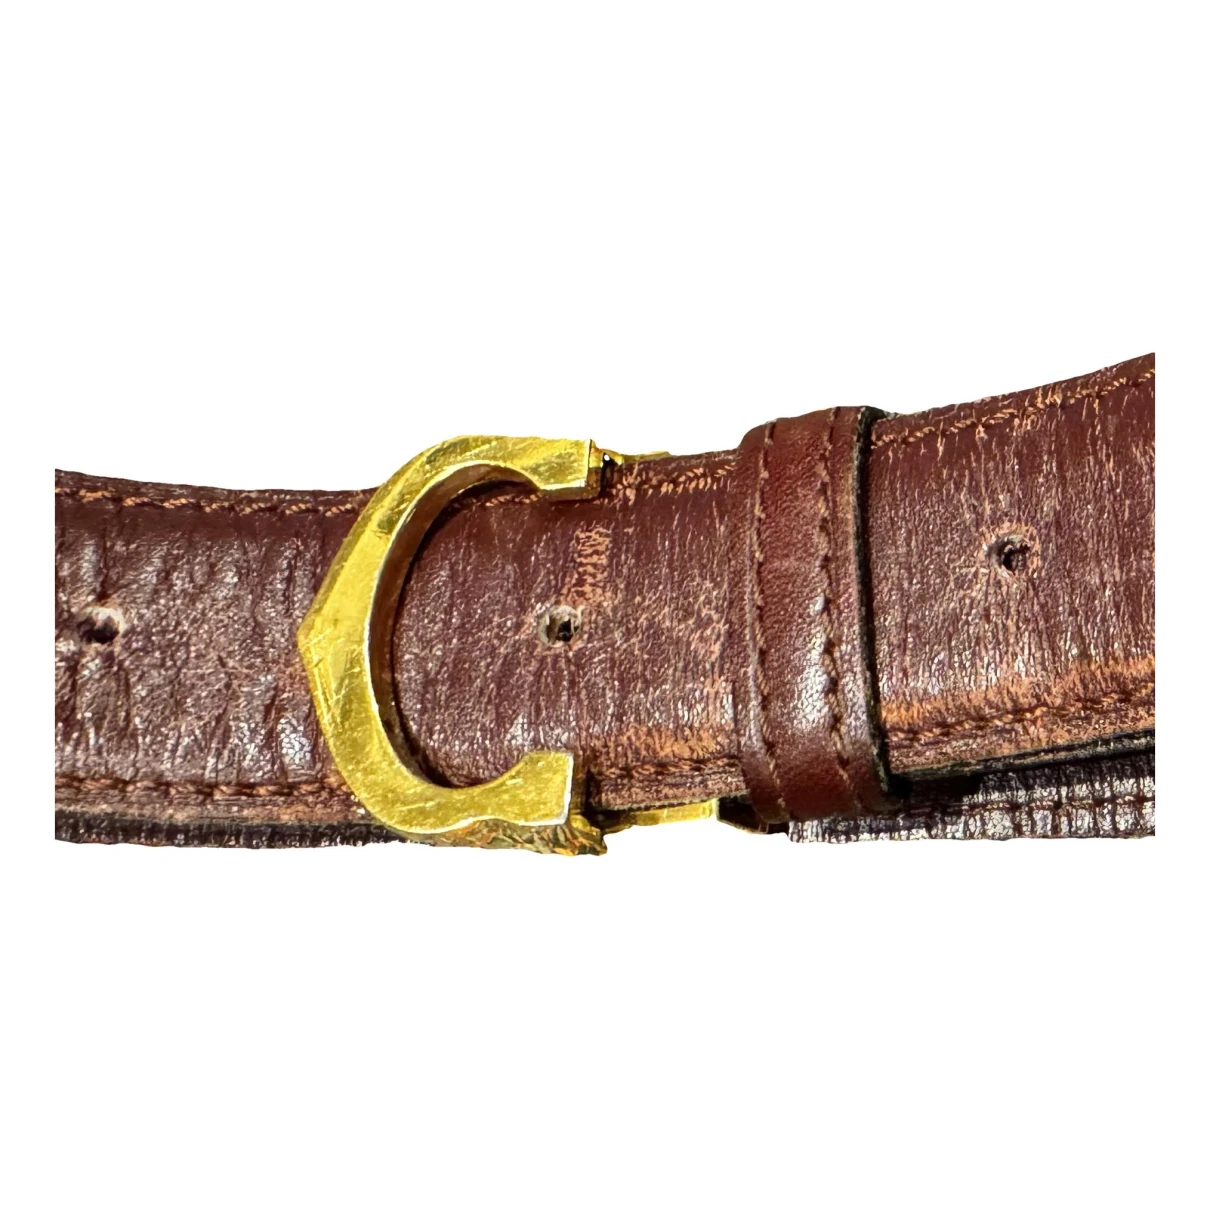 Pre-owned Cartier Leather Belt In Brown